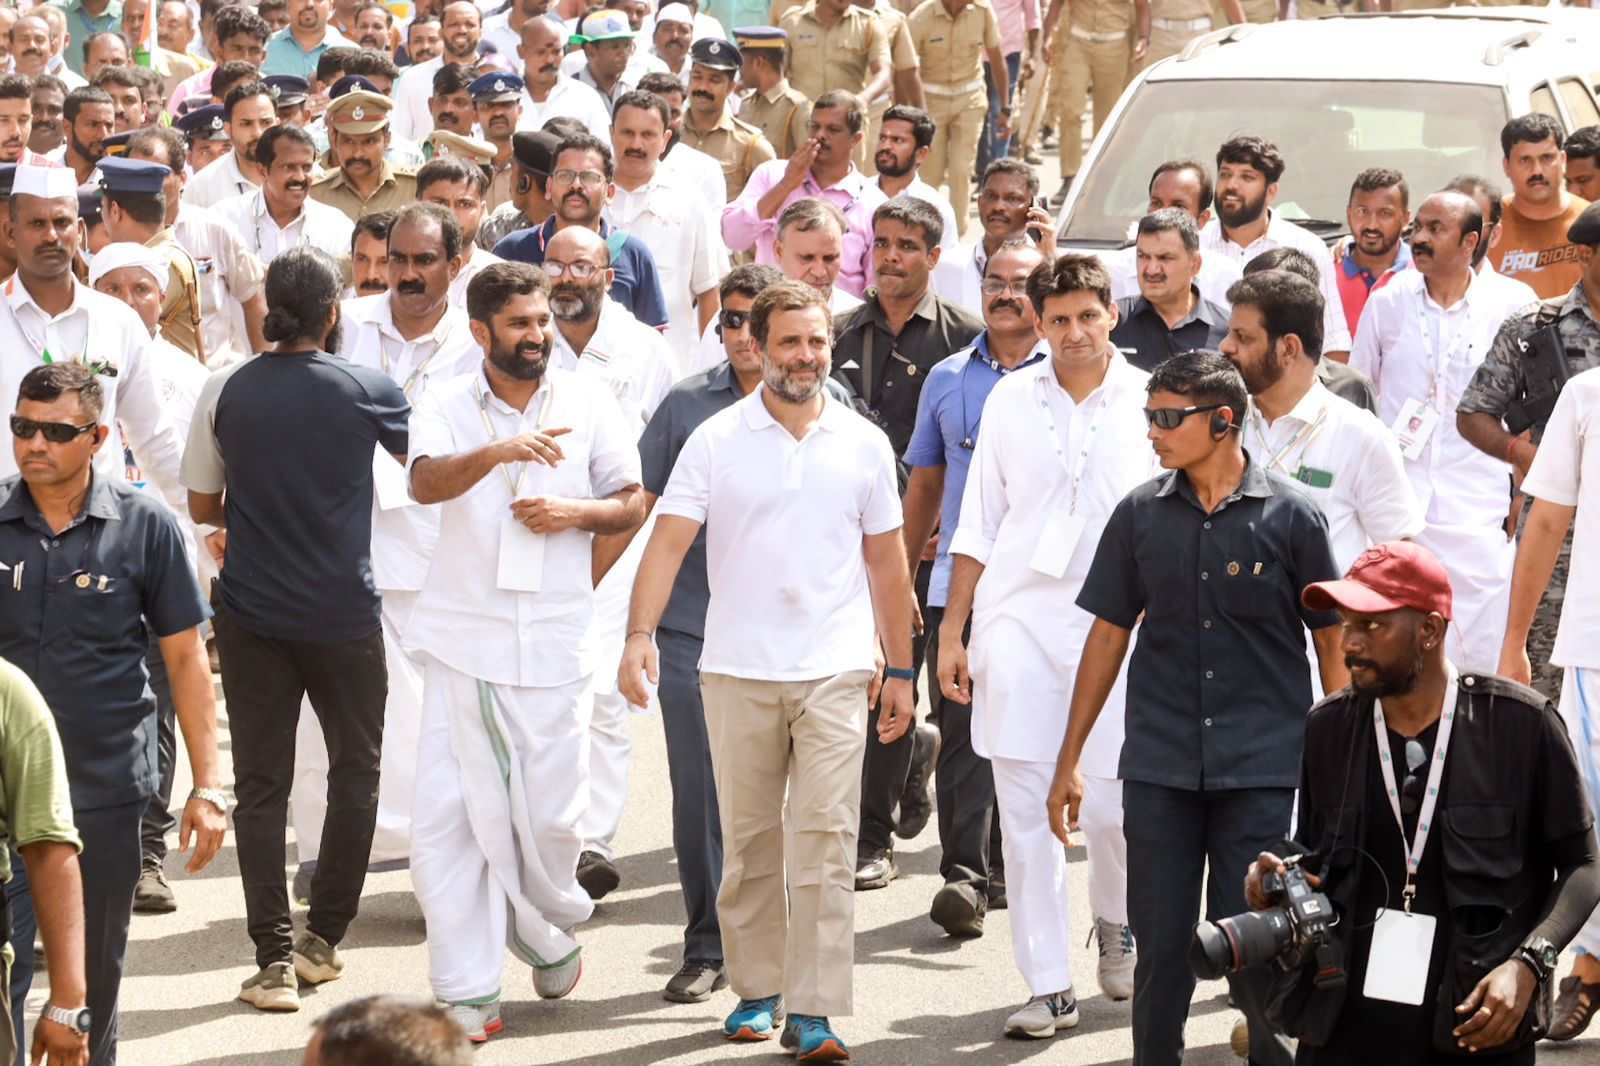 Author of the article and KPCC Vice-president VT Balram with Rahul Gandhi during the Bharat Jodo Yatra. (Supplied)